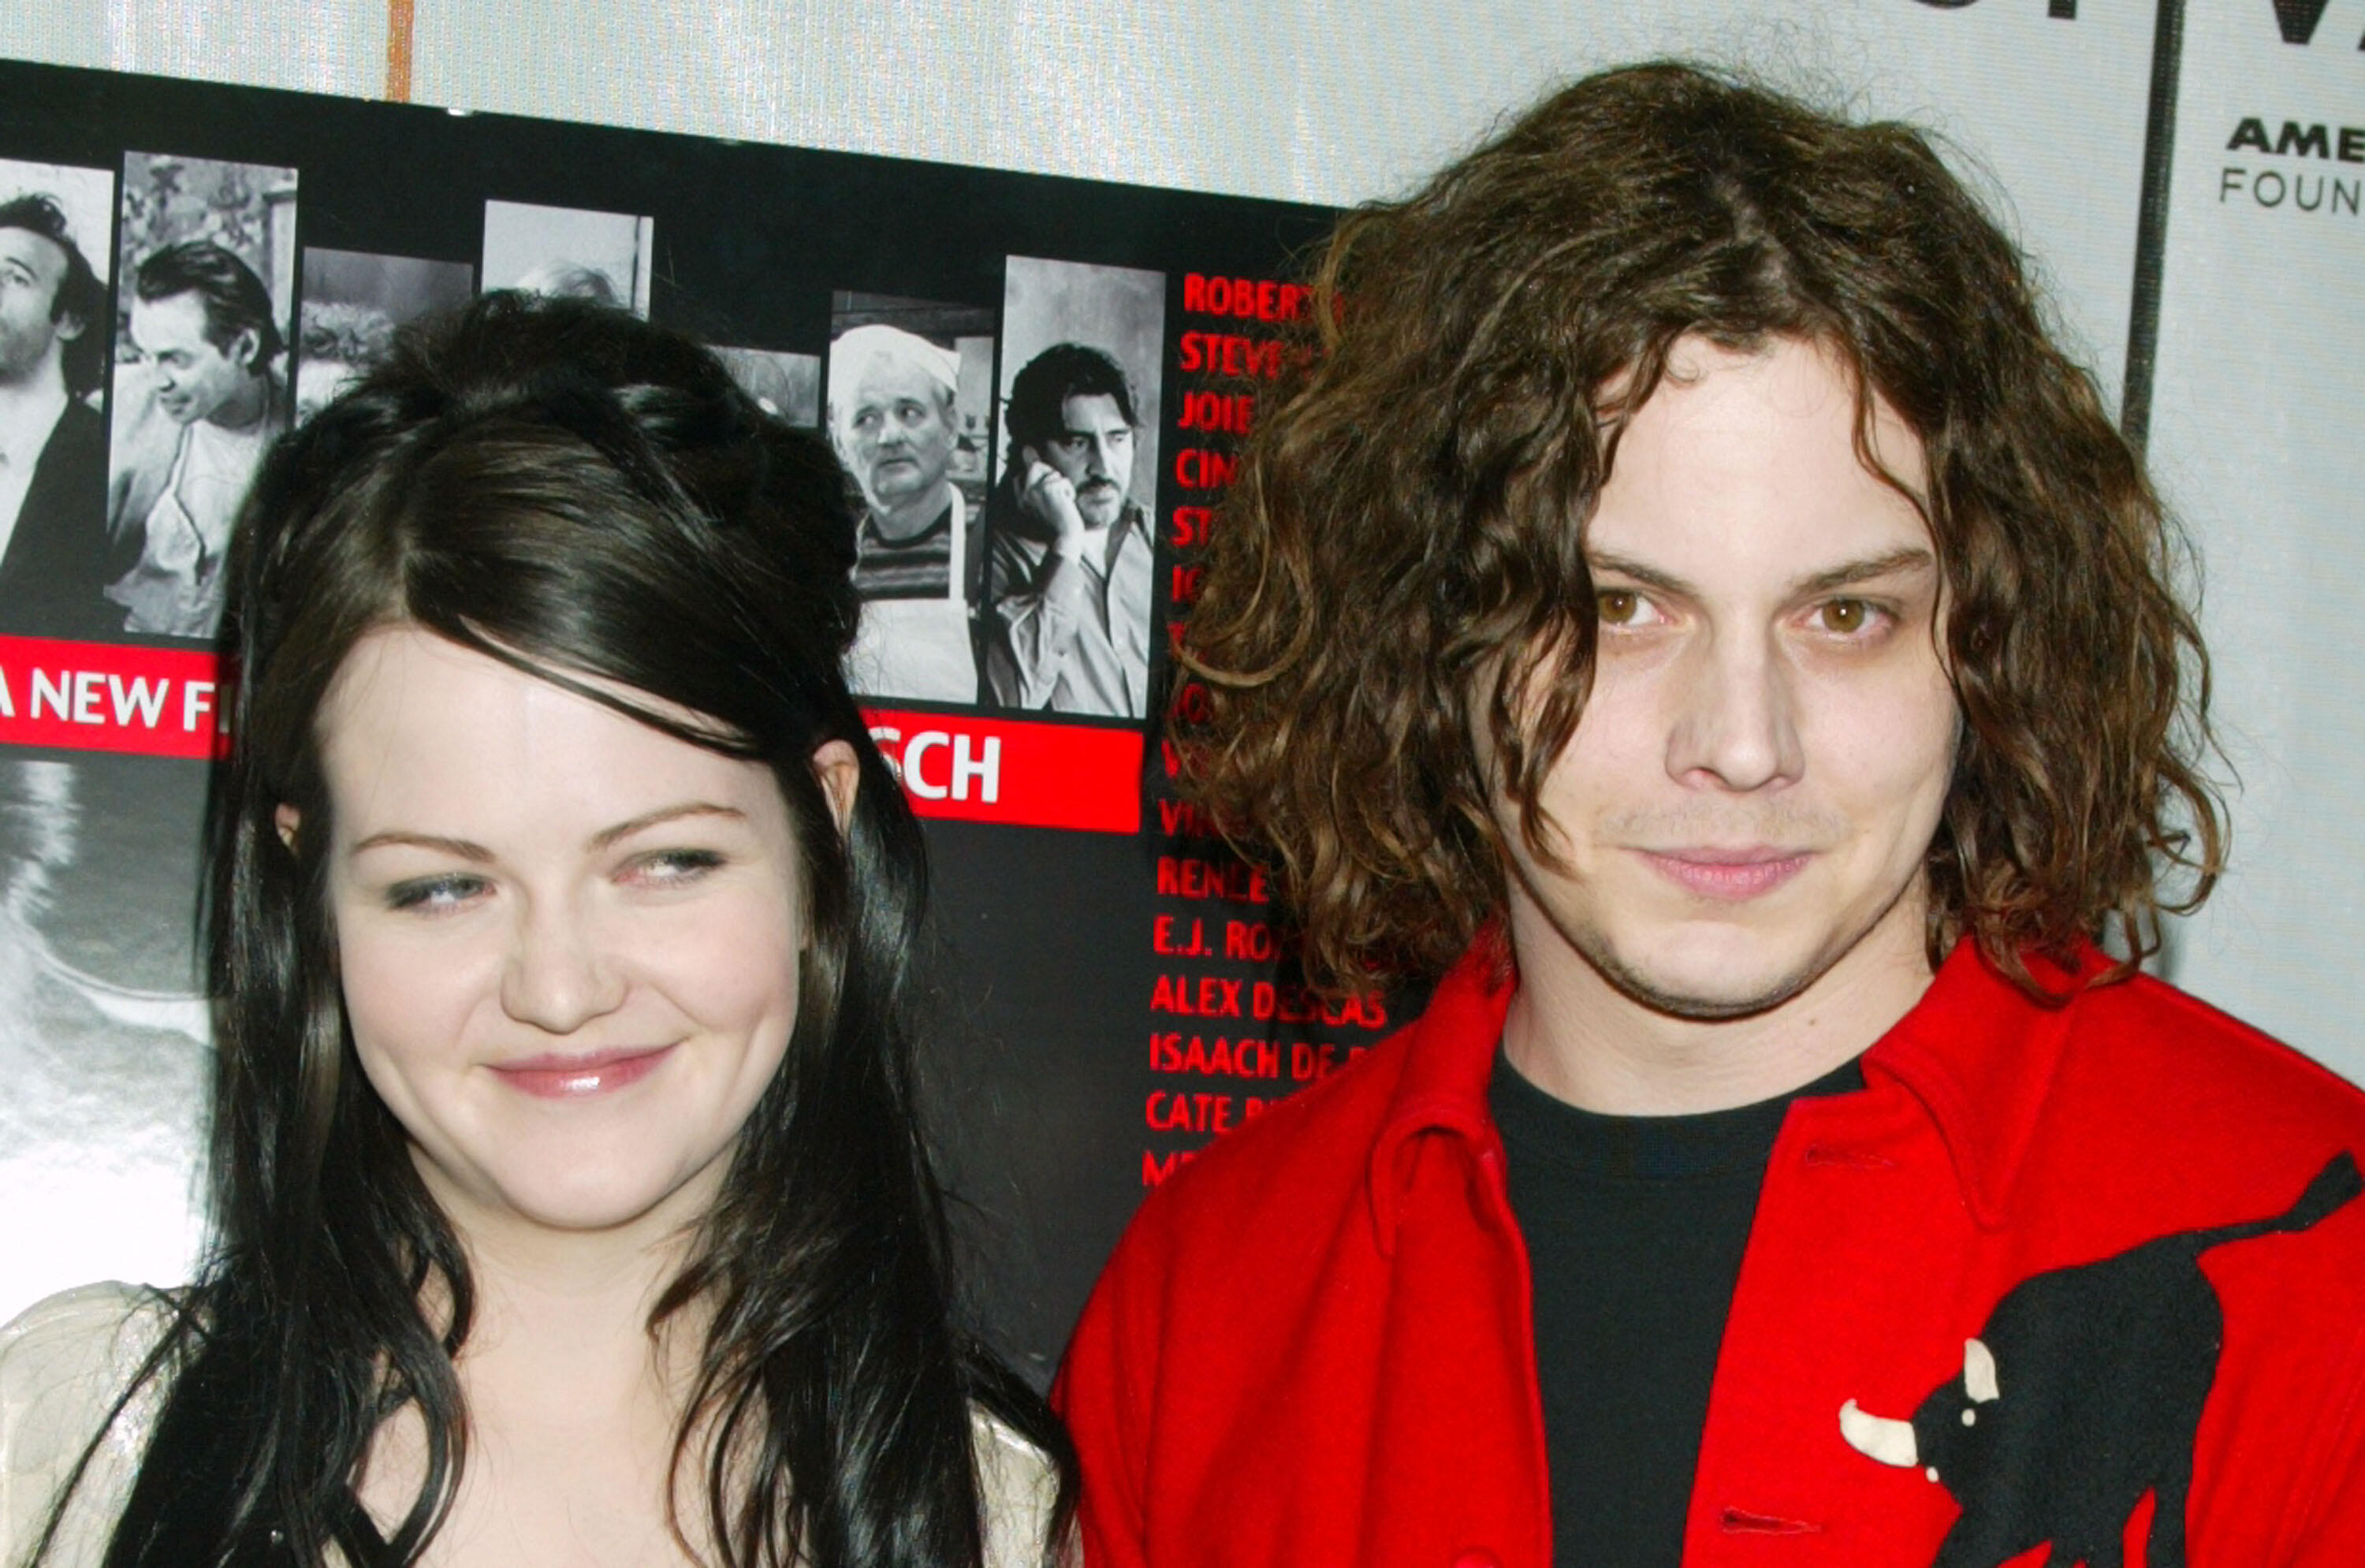 Was the White Stripes' Meg White a great or drummer? Online